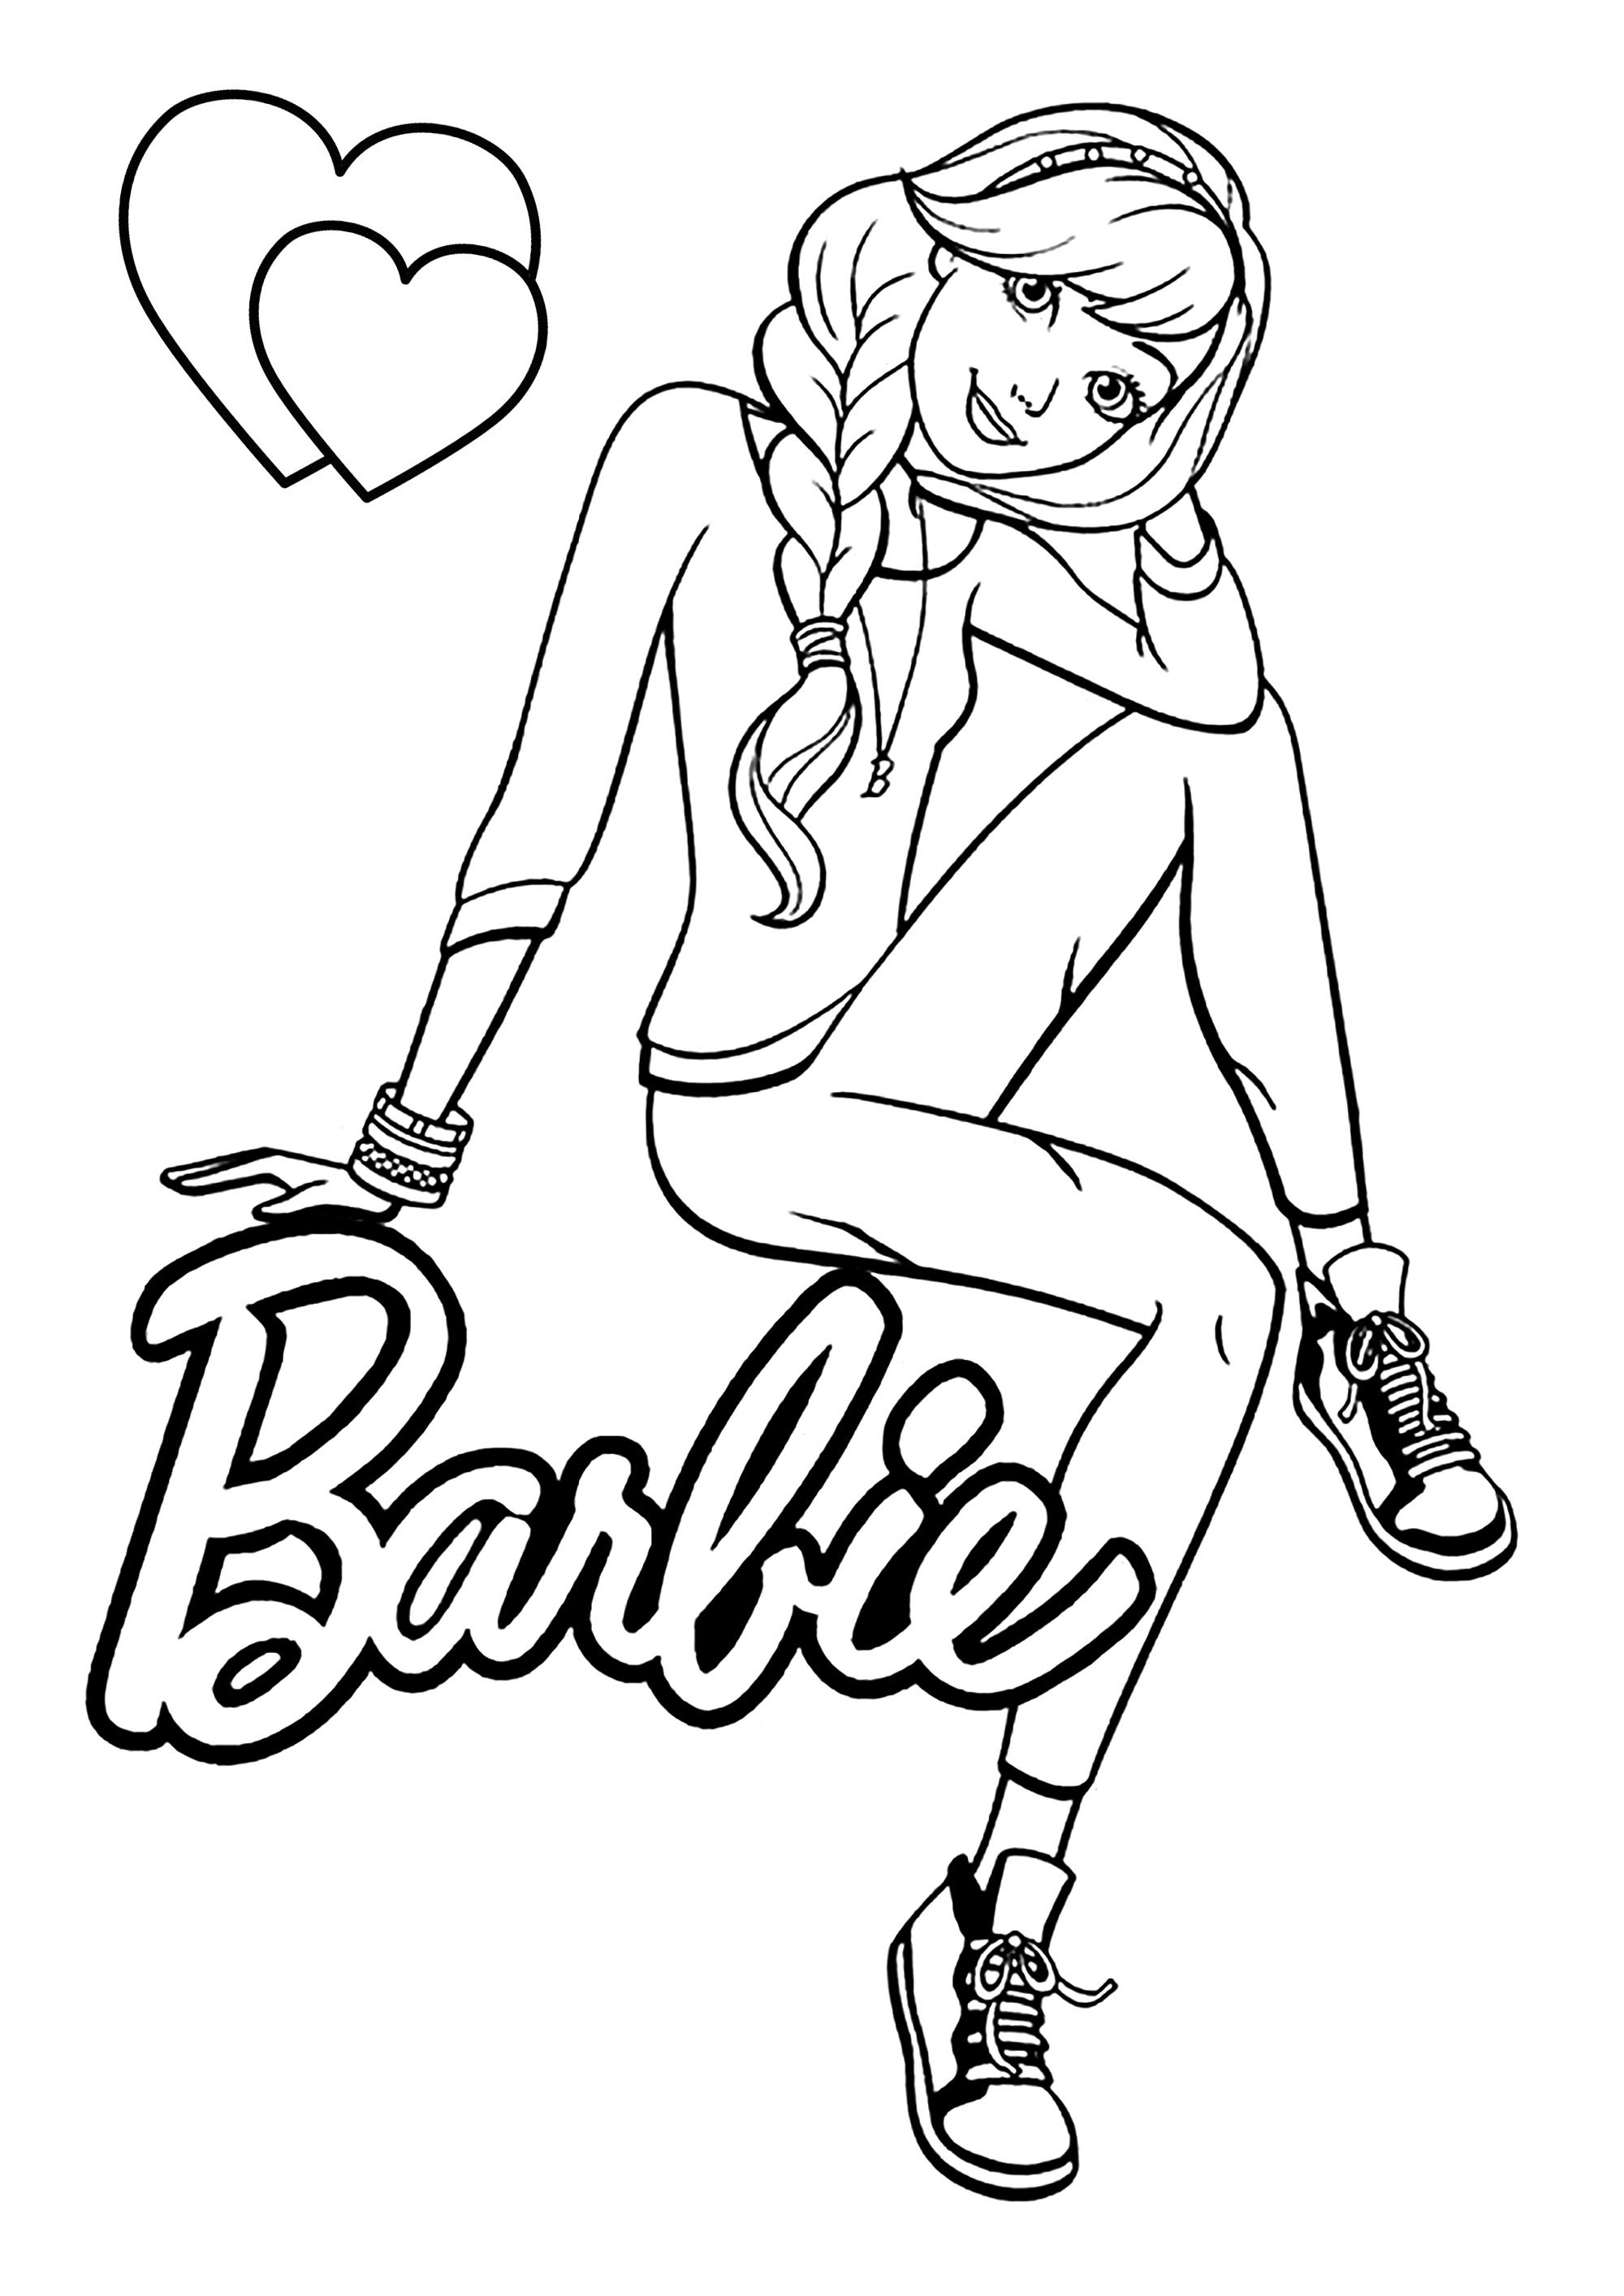 Simple Barbie coloring. Color Barbie, the logo and the hearts in the colors of your choice